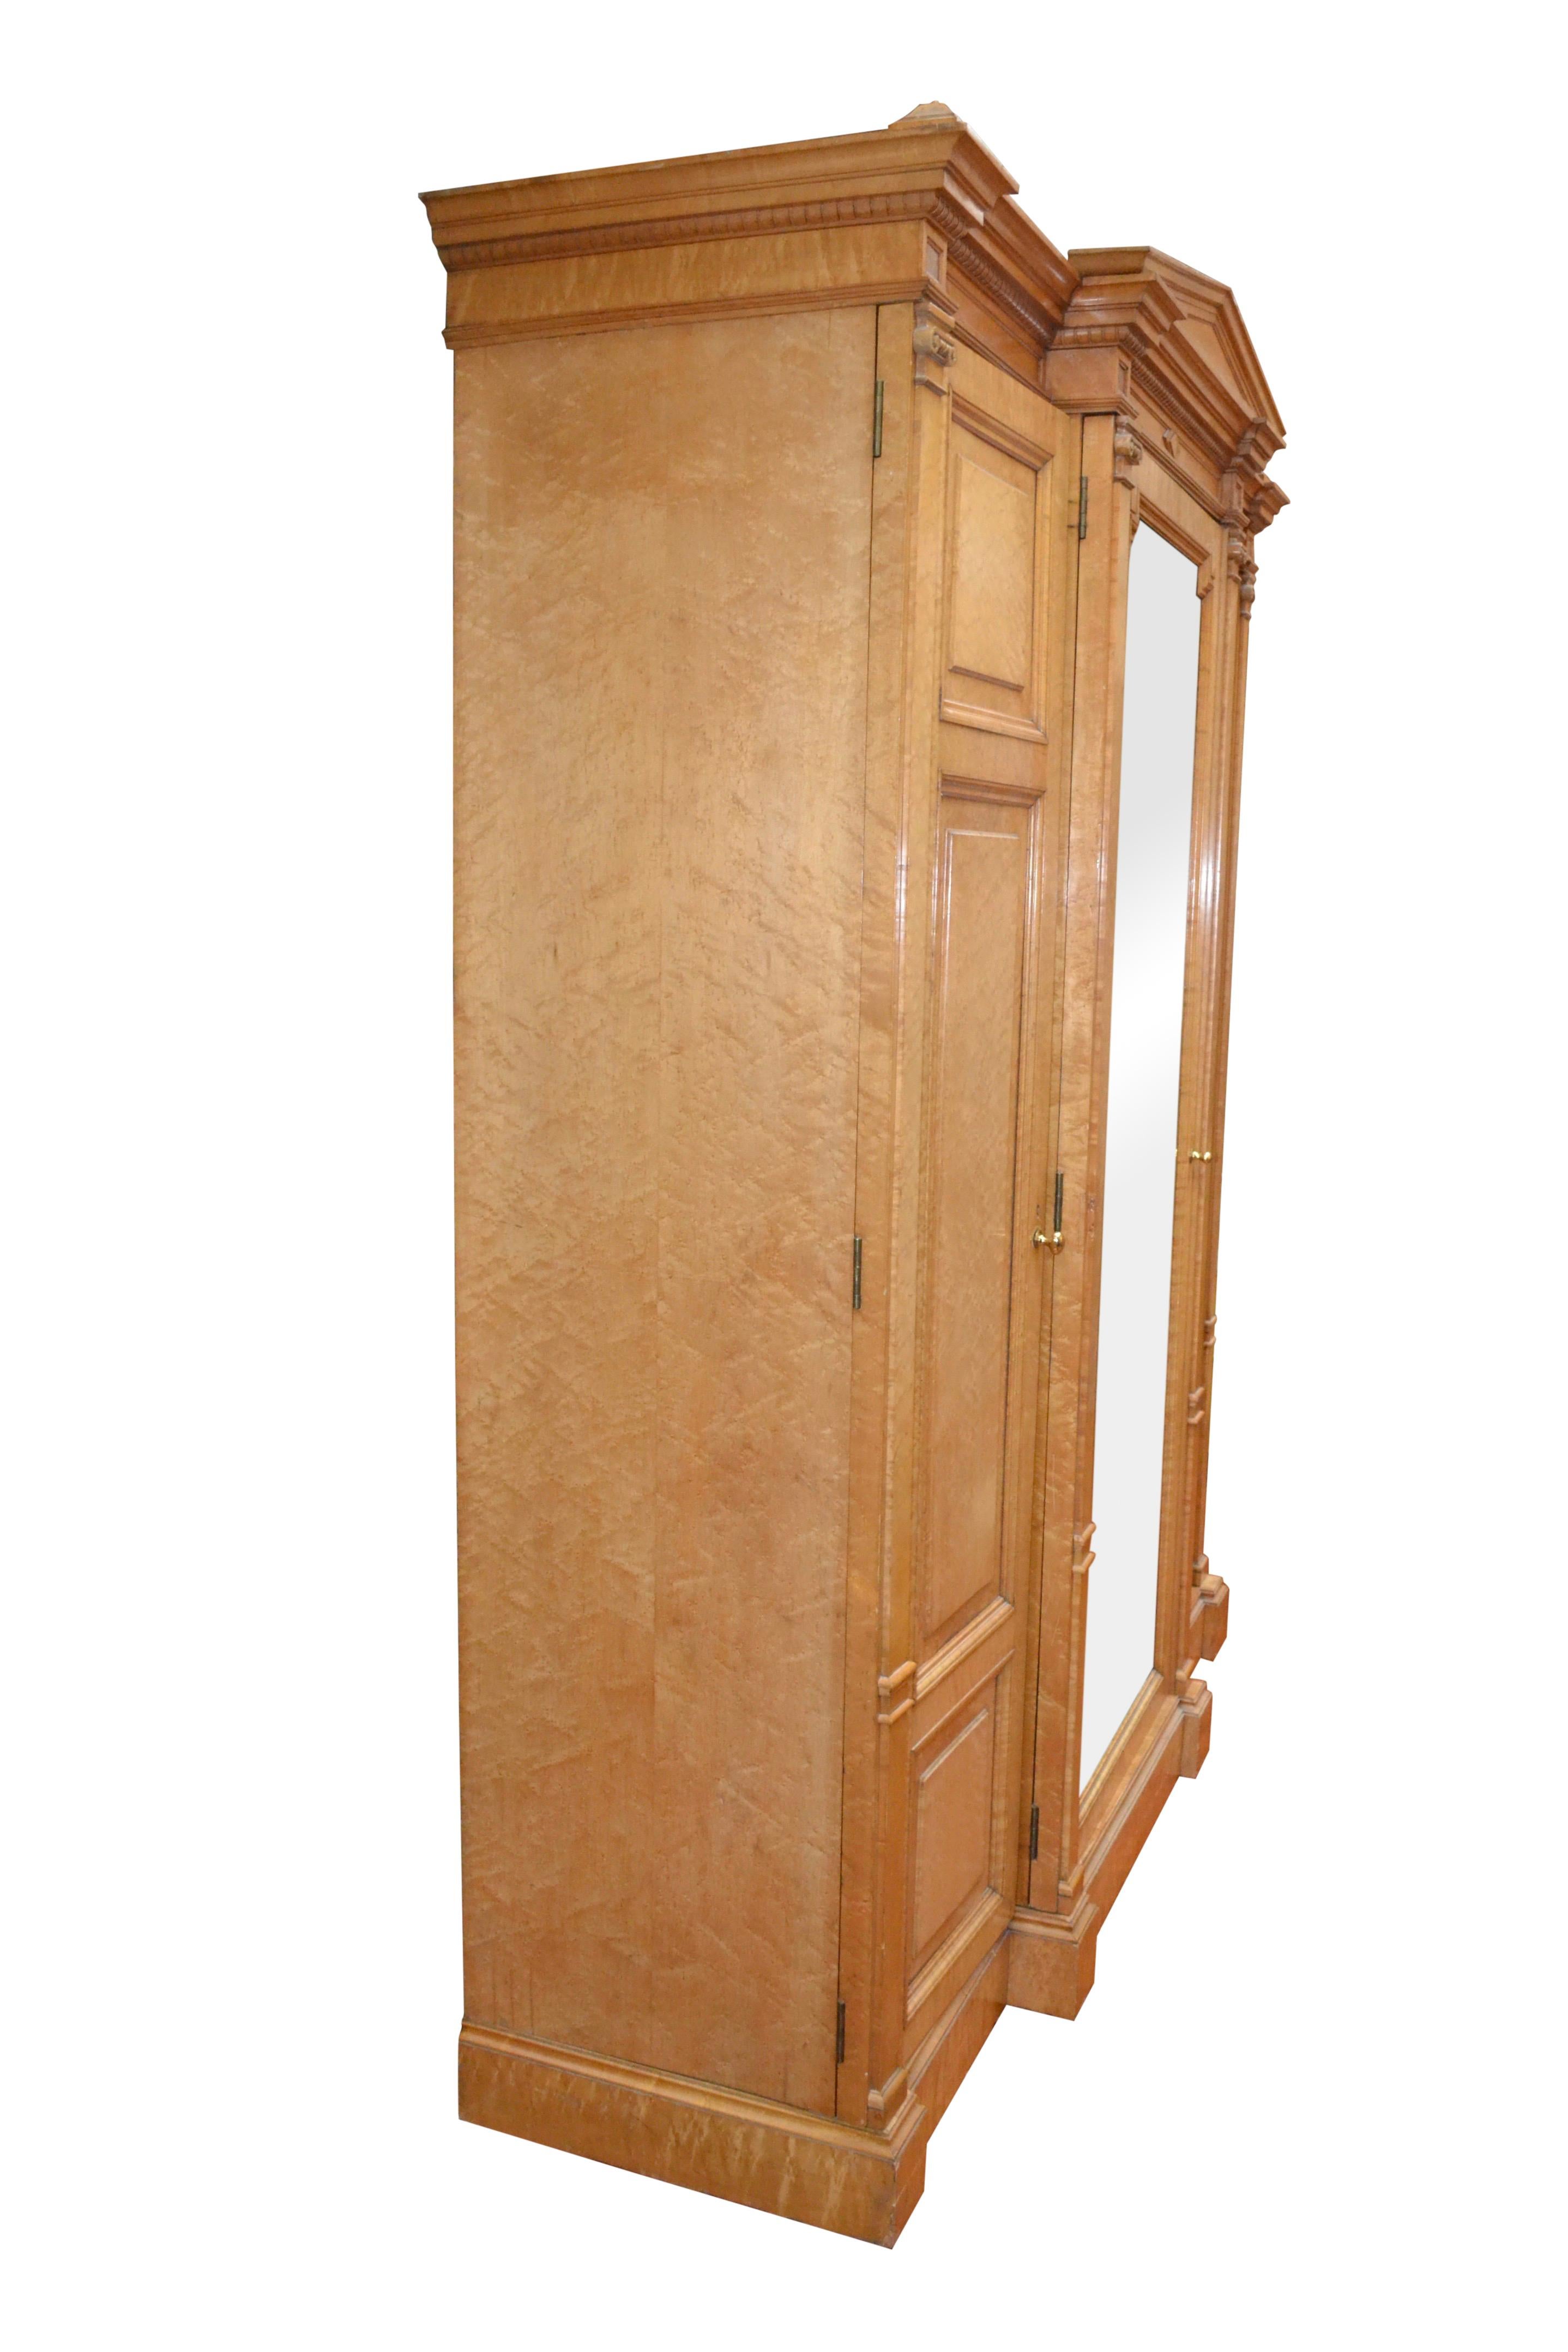 19th Century American Neoclassical Style Bird's-Eye Maple Armoire In Good Condition For Sale In Vancouver, British Columbia